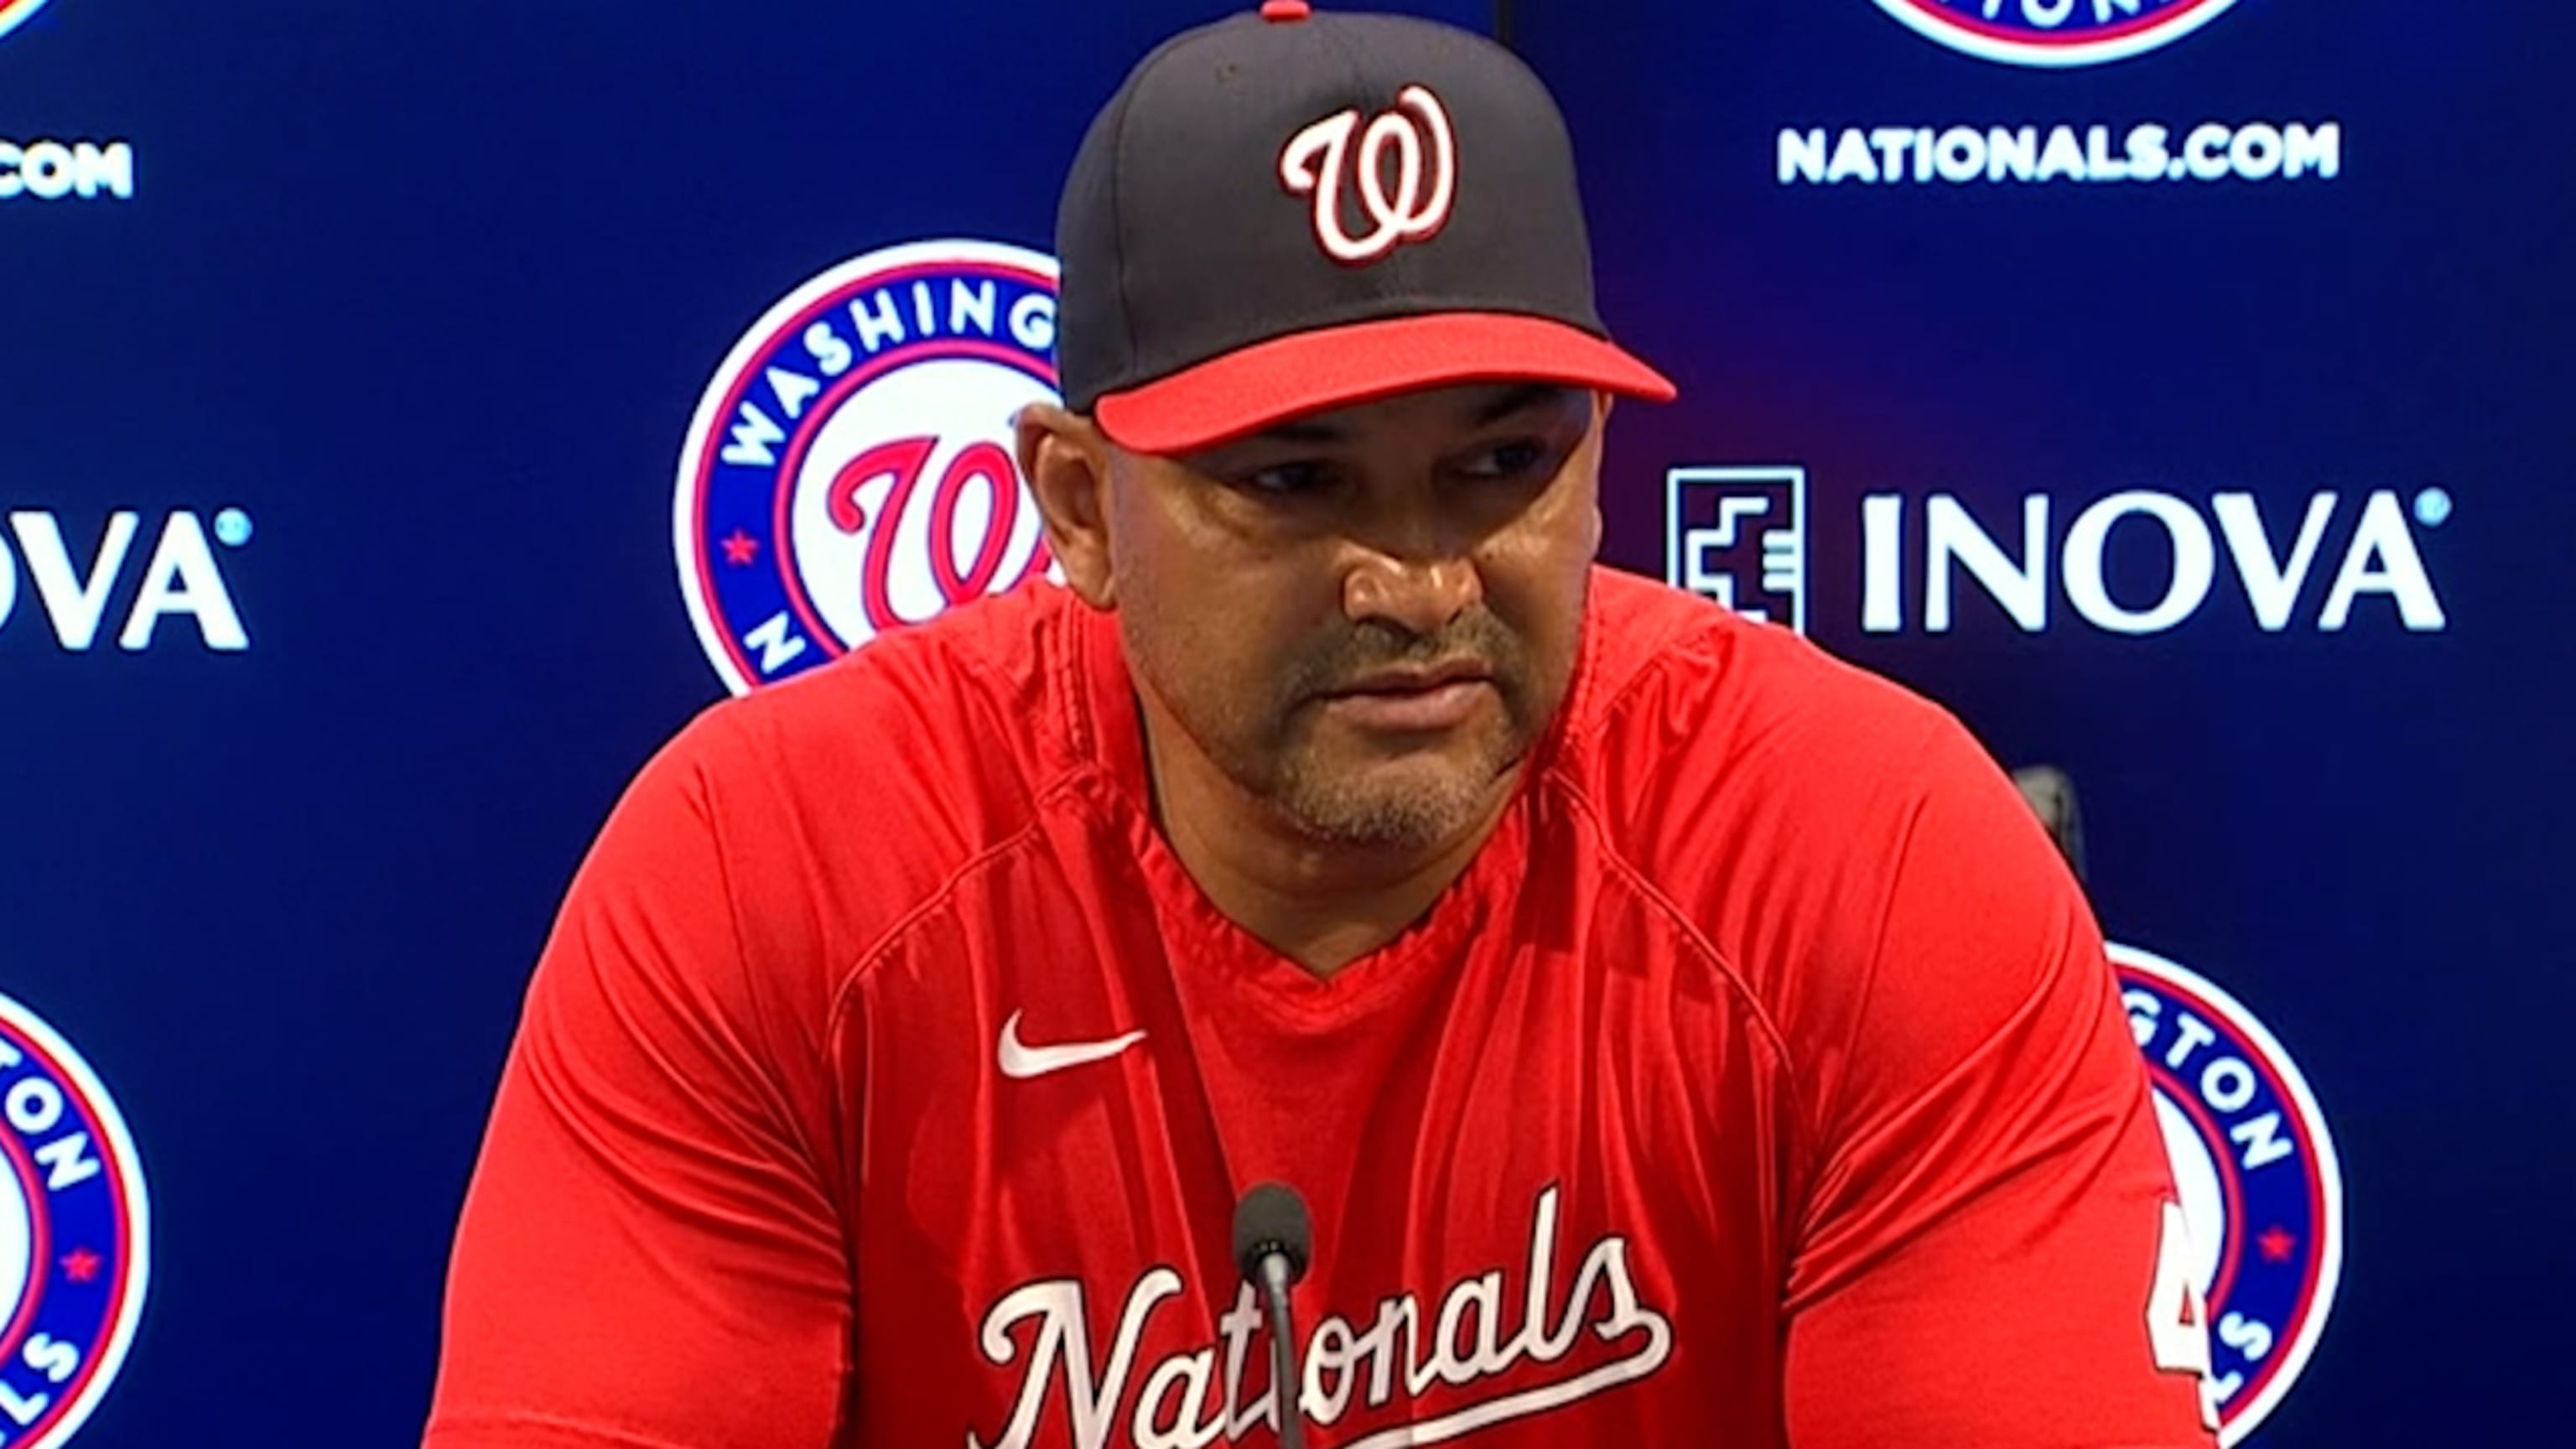 Nationals to wear lucky navy blue jerseys for all of World Series